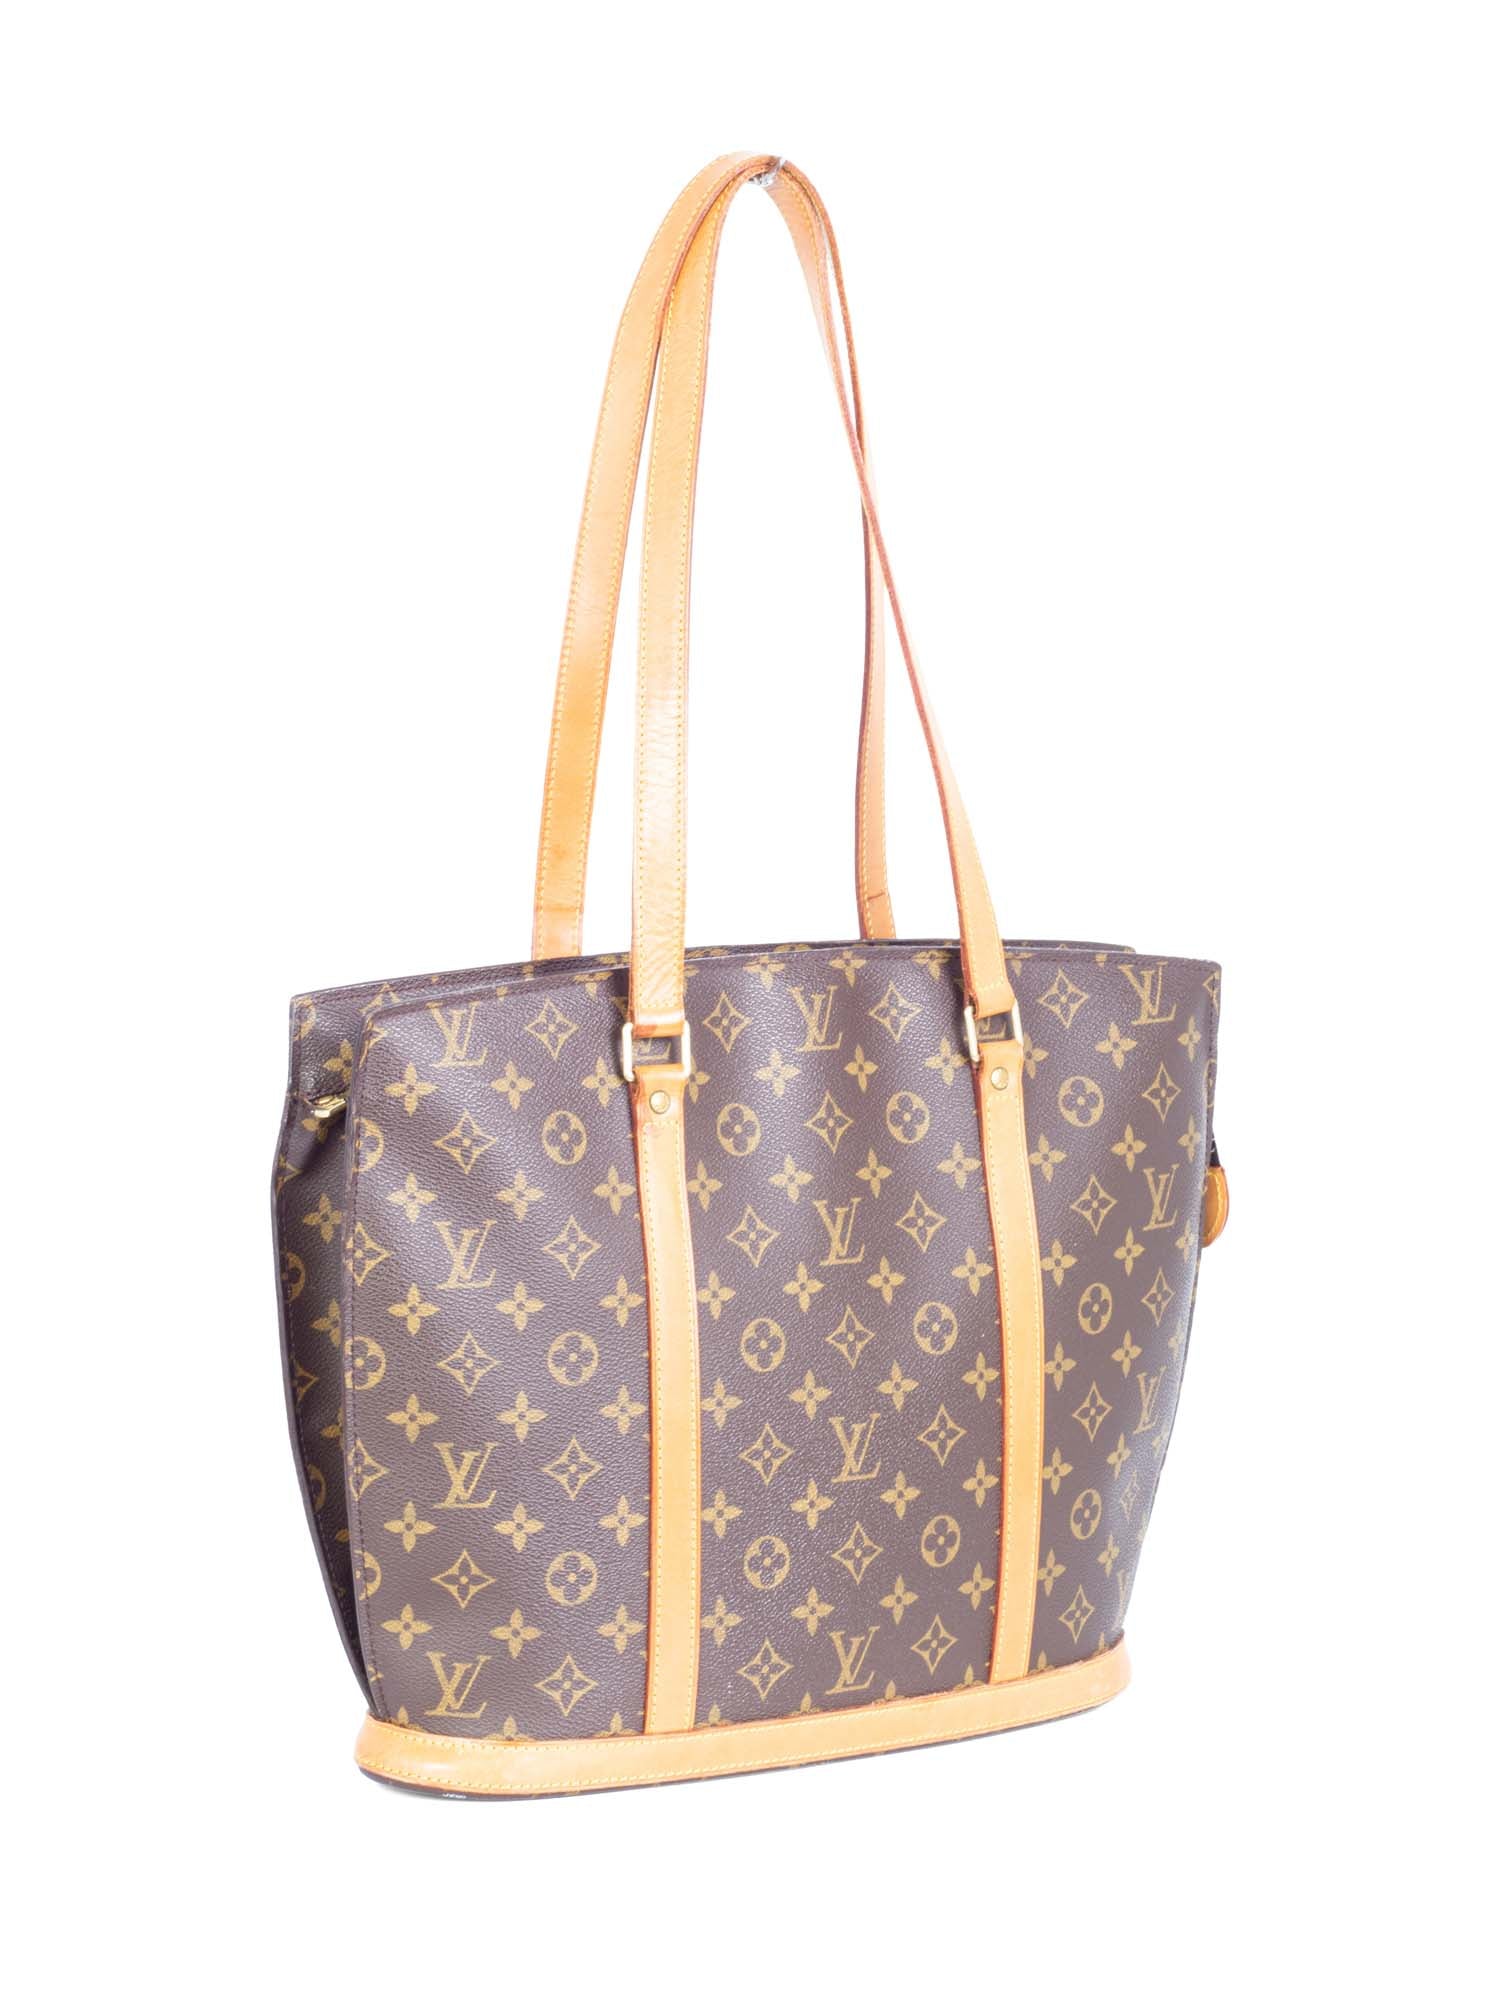 deadlock Blandet bh How to Tell a Real Louis Vuitton From a Fake